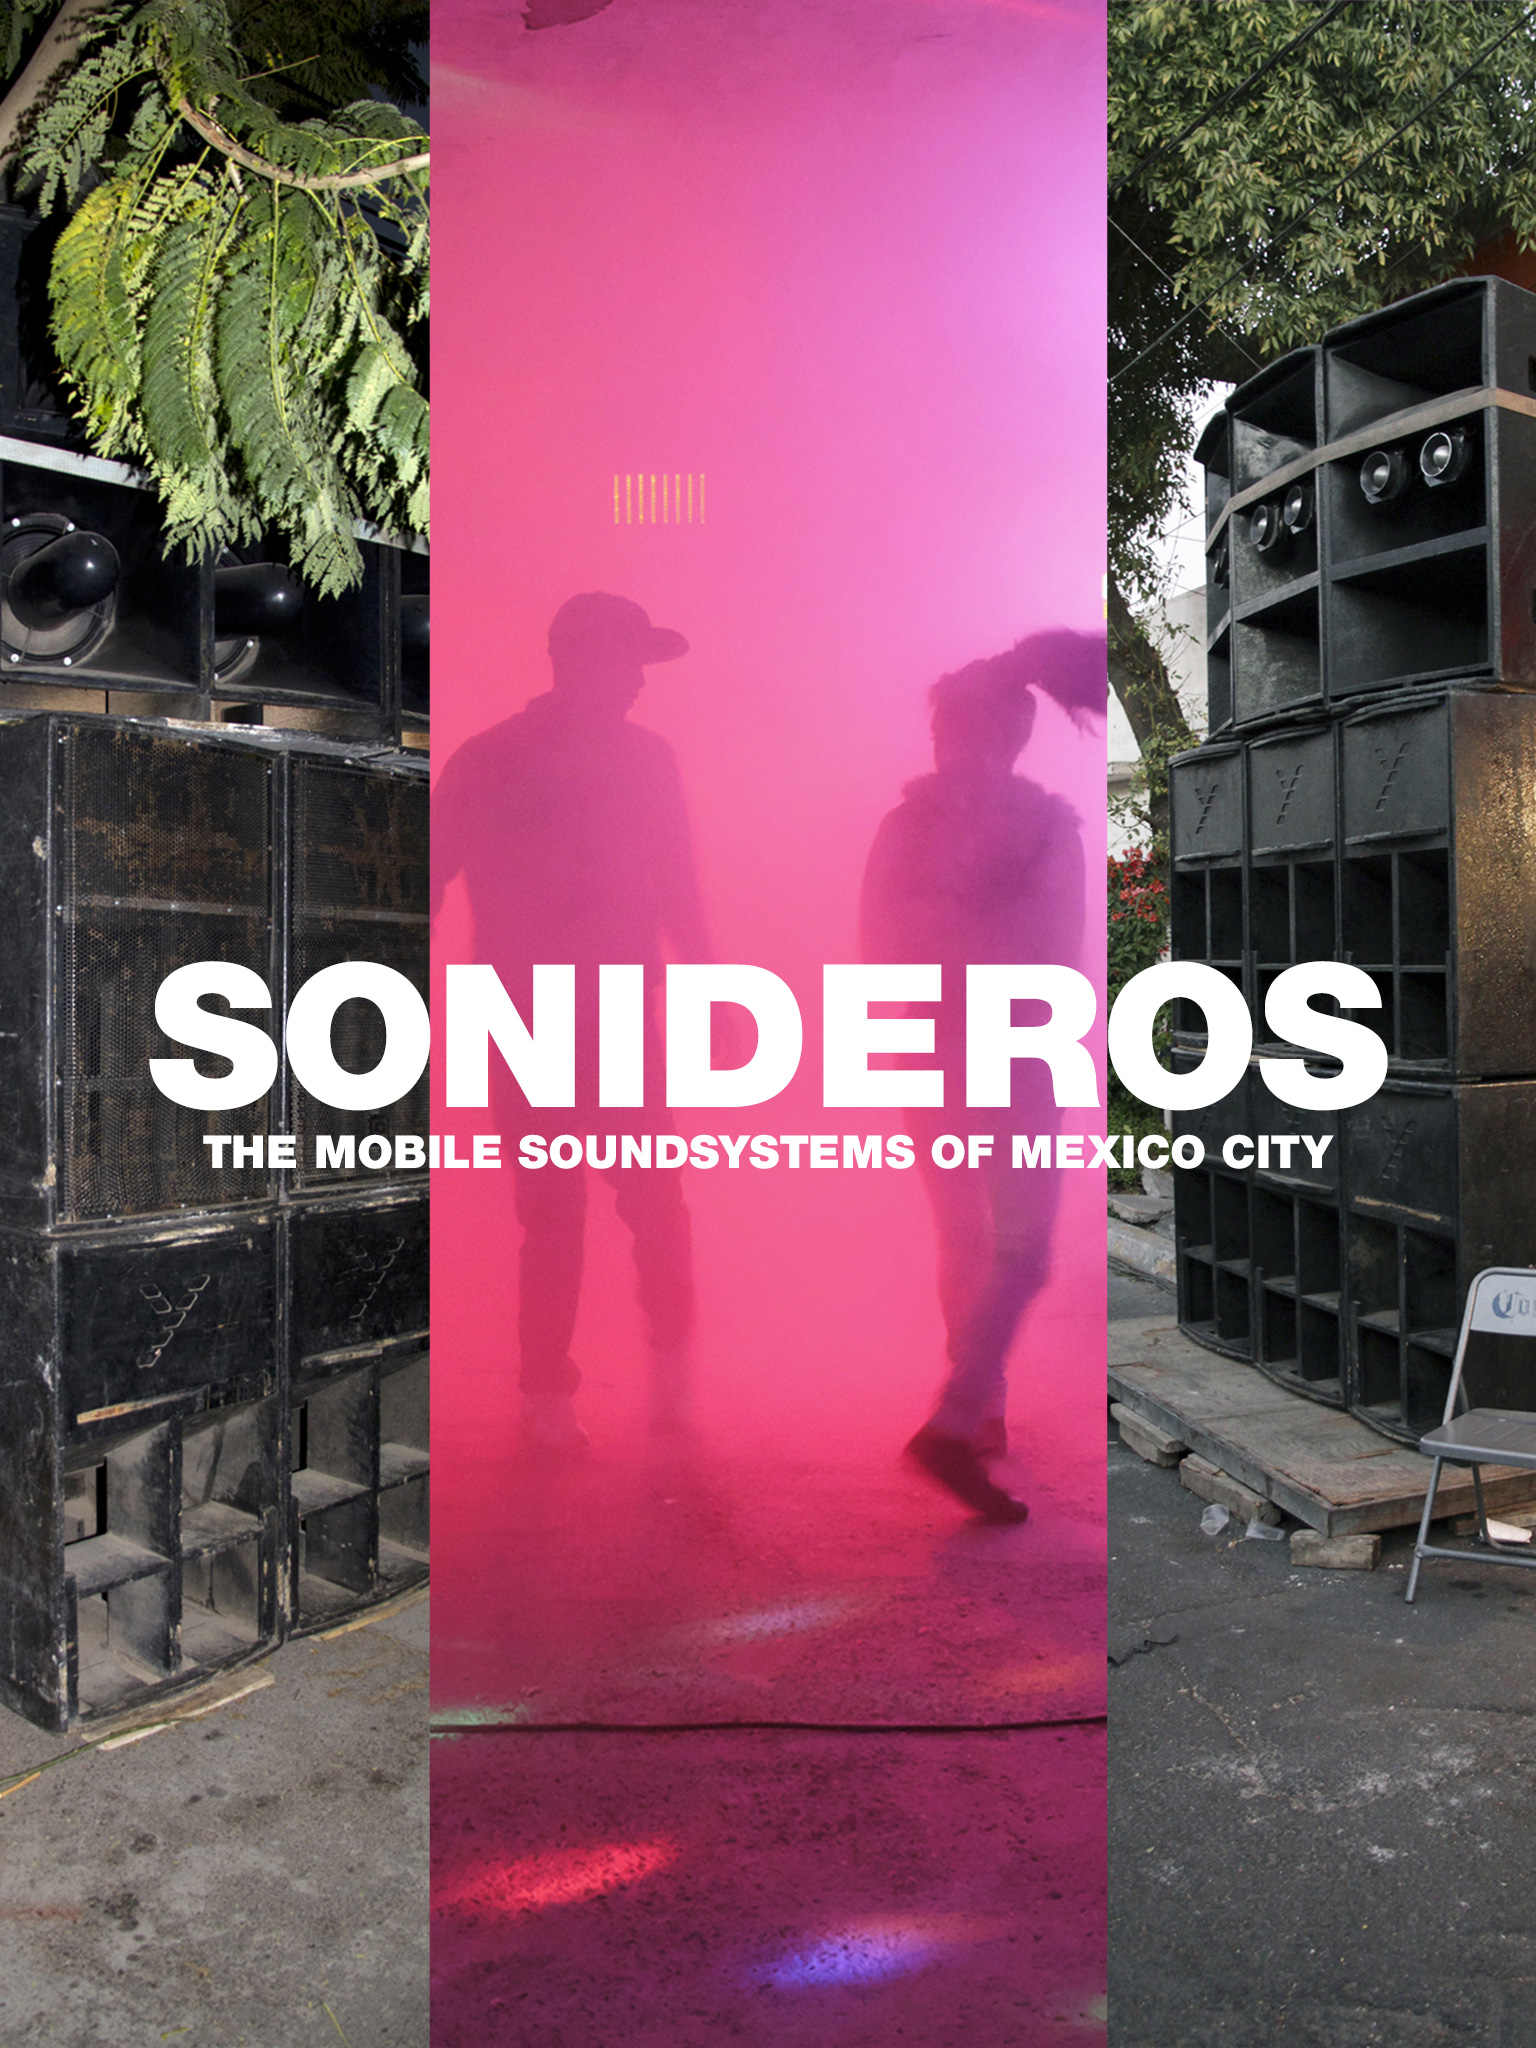 Sonideros: The mobile soundsystems of Mexico City